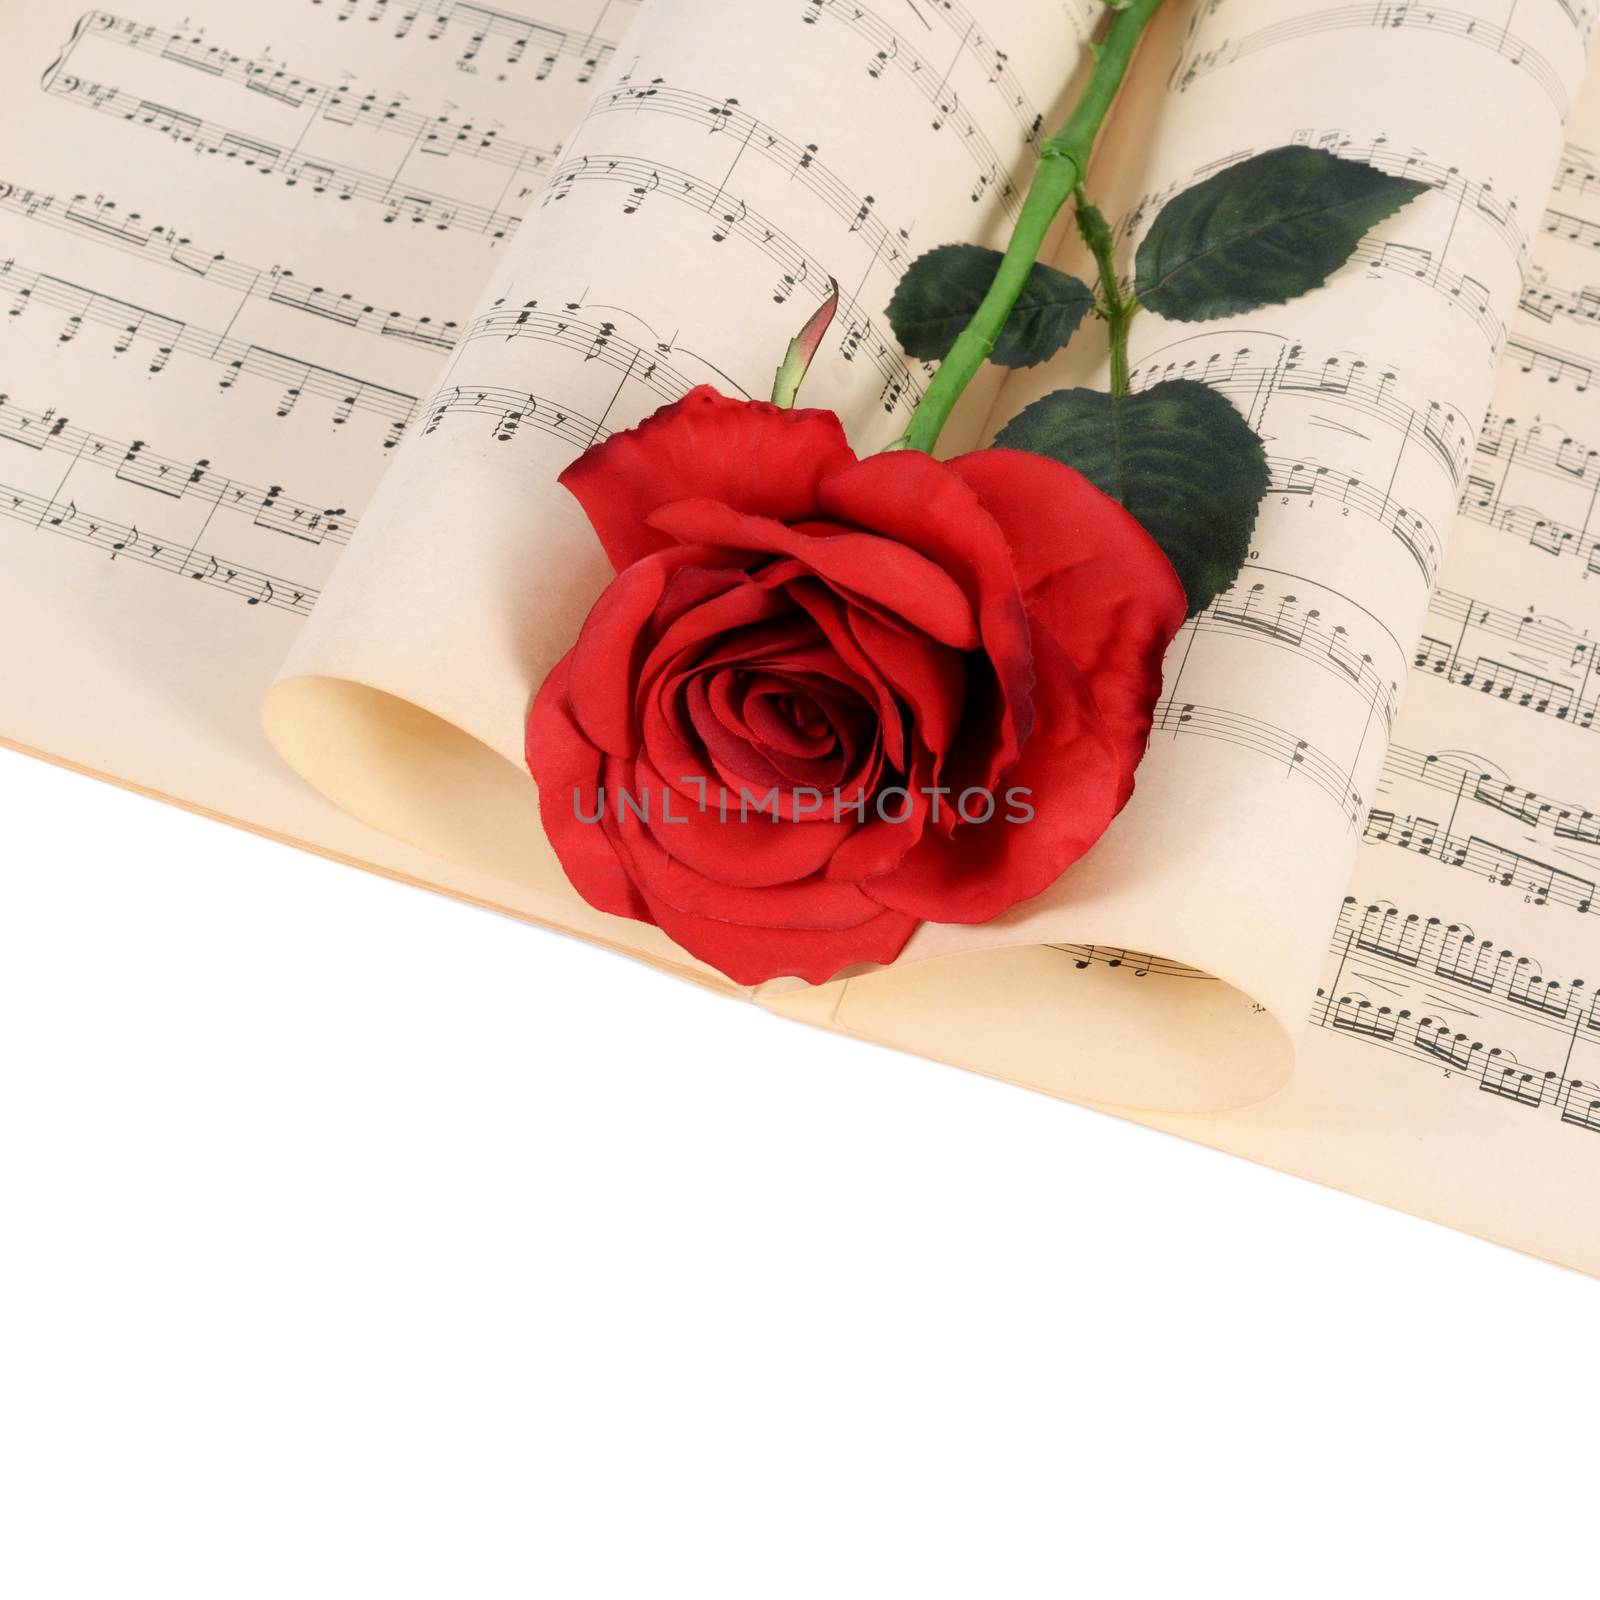 The rose on notebooks with musical notes